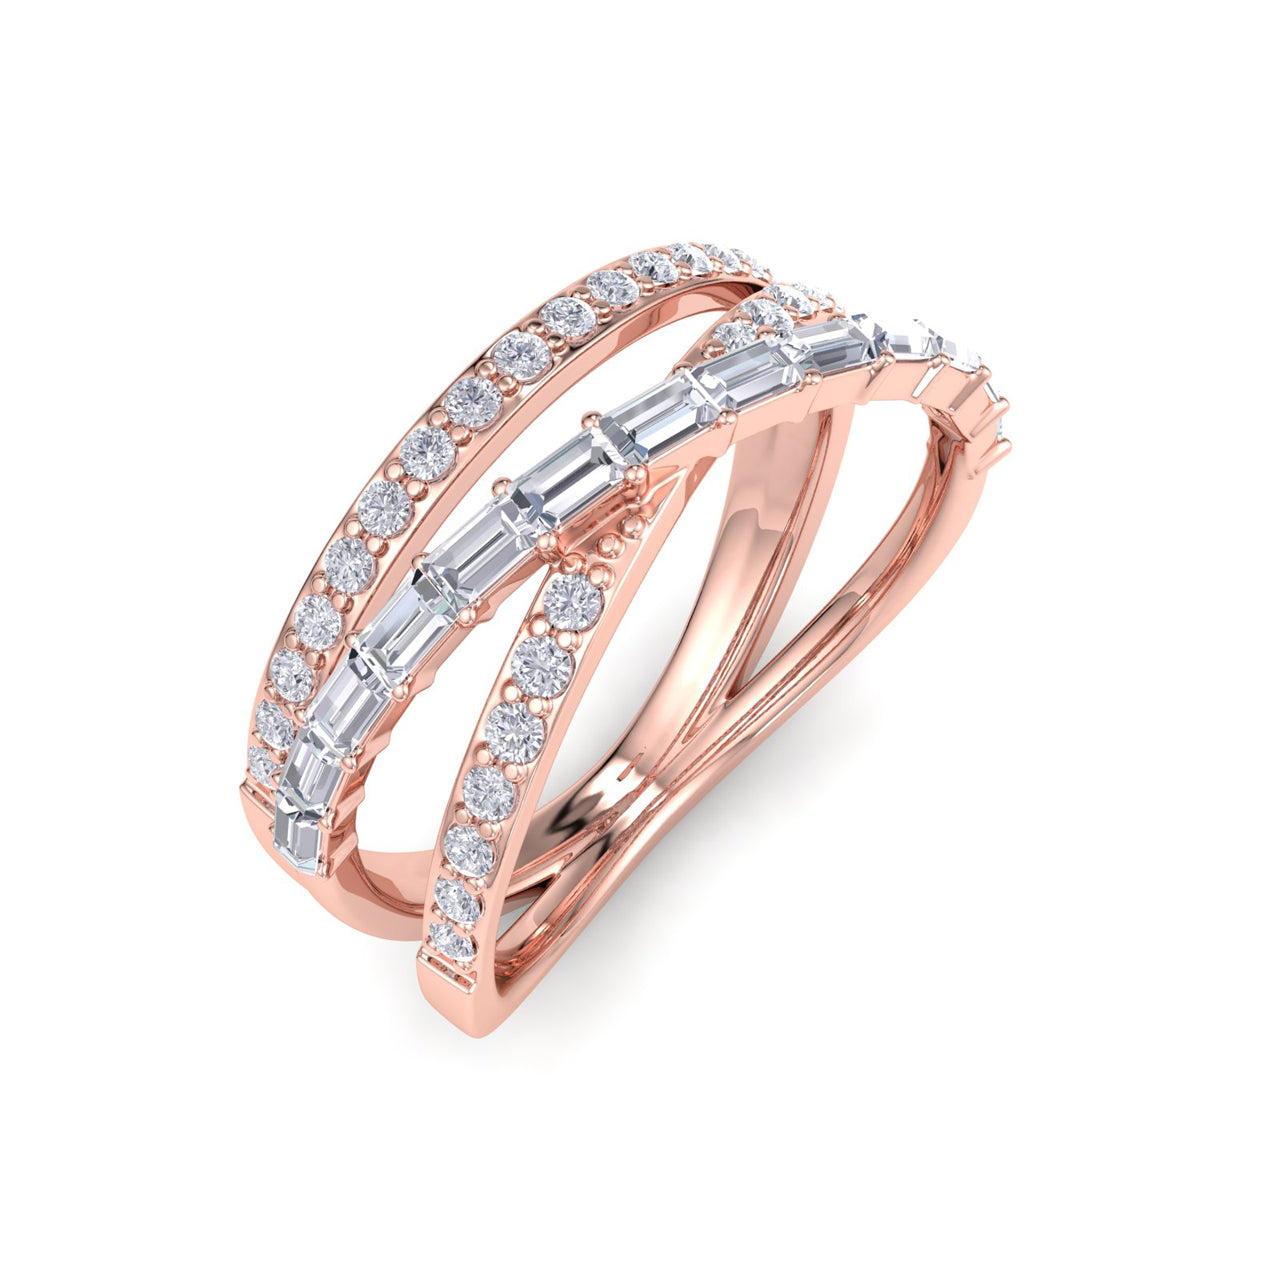 Ring in yellow gold with white diamonds of 0.72 ct in weight